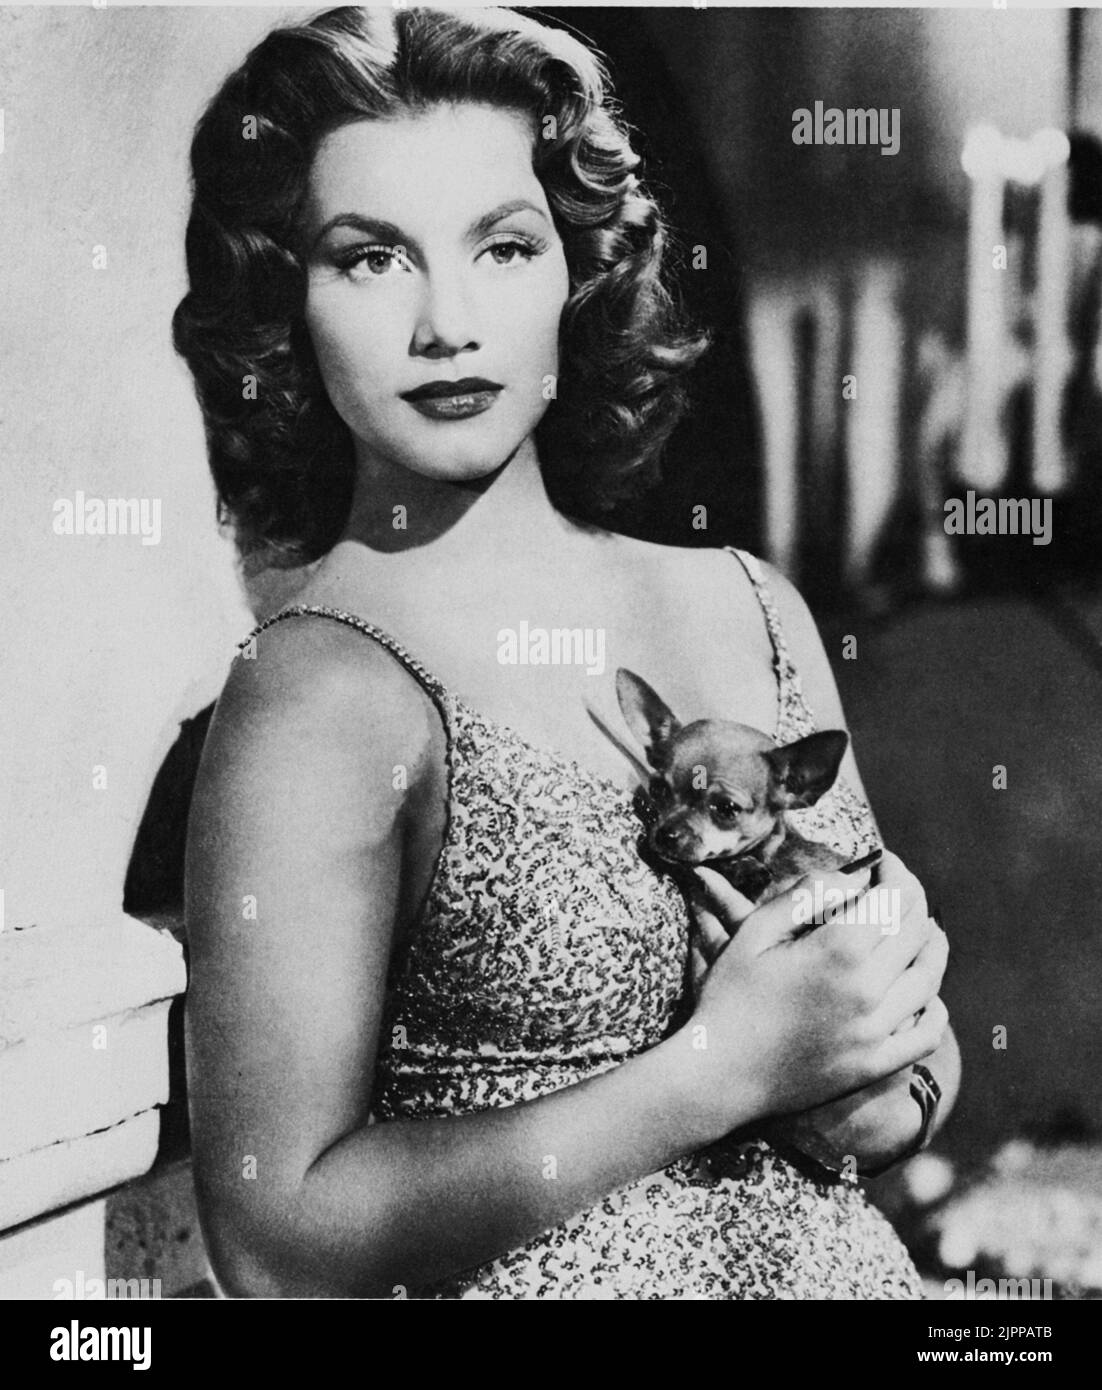 The movie actress LINDA CHRISTIAN ( 1923 - 2011 ) , married from 1949 to 1956 with Tyrone Power and from 1962 to 1963 with Edmund Purdom . Mother of Romina Power Carrisi . - CINEMA - cane - pet dog - chiuawa -  ----  Archivio GBB Stock Photo